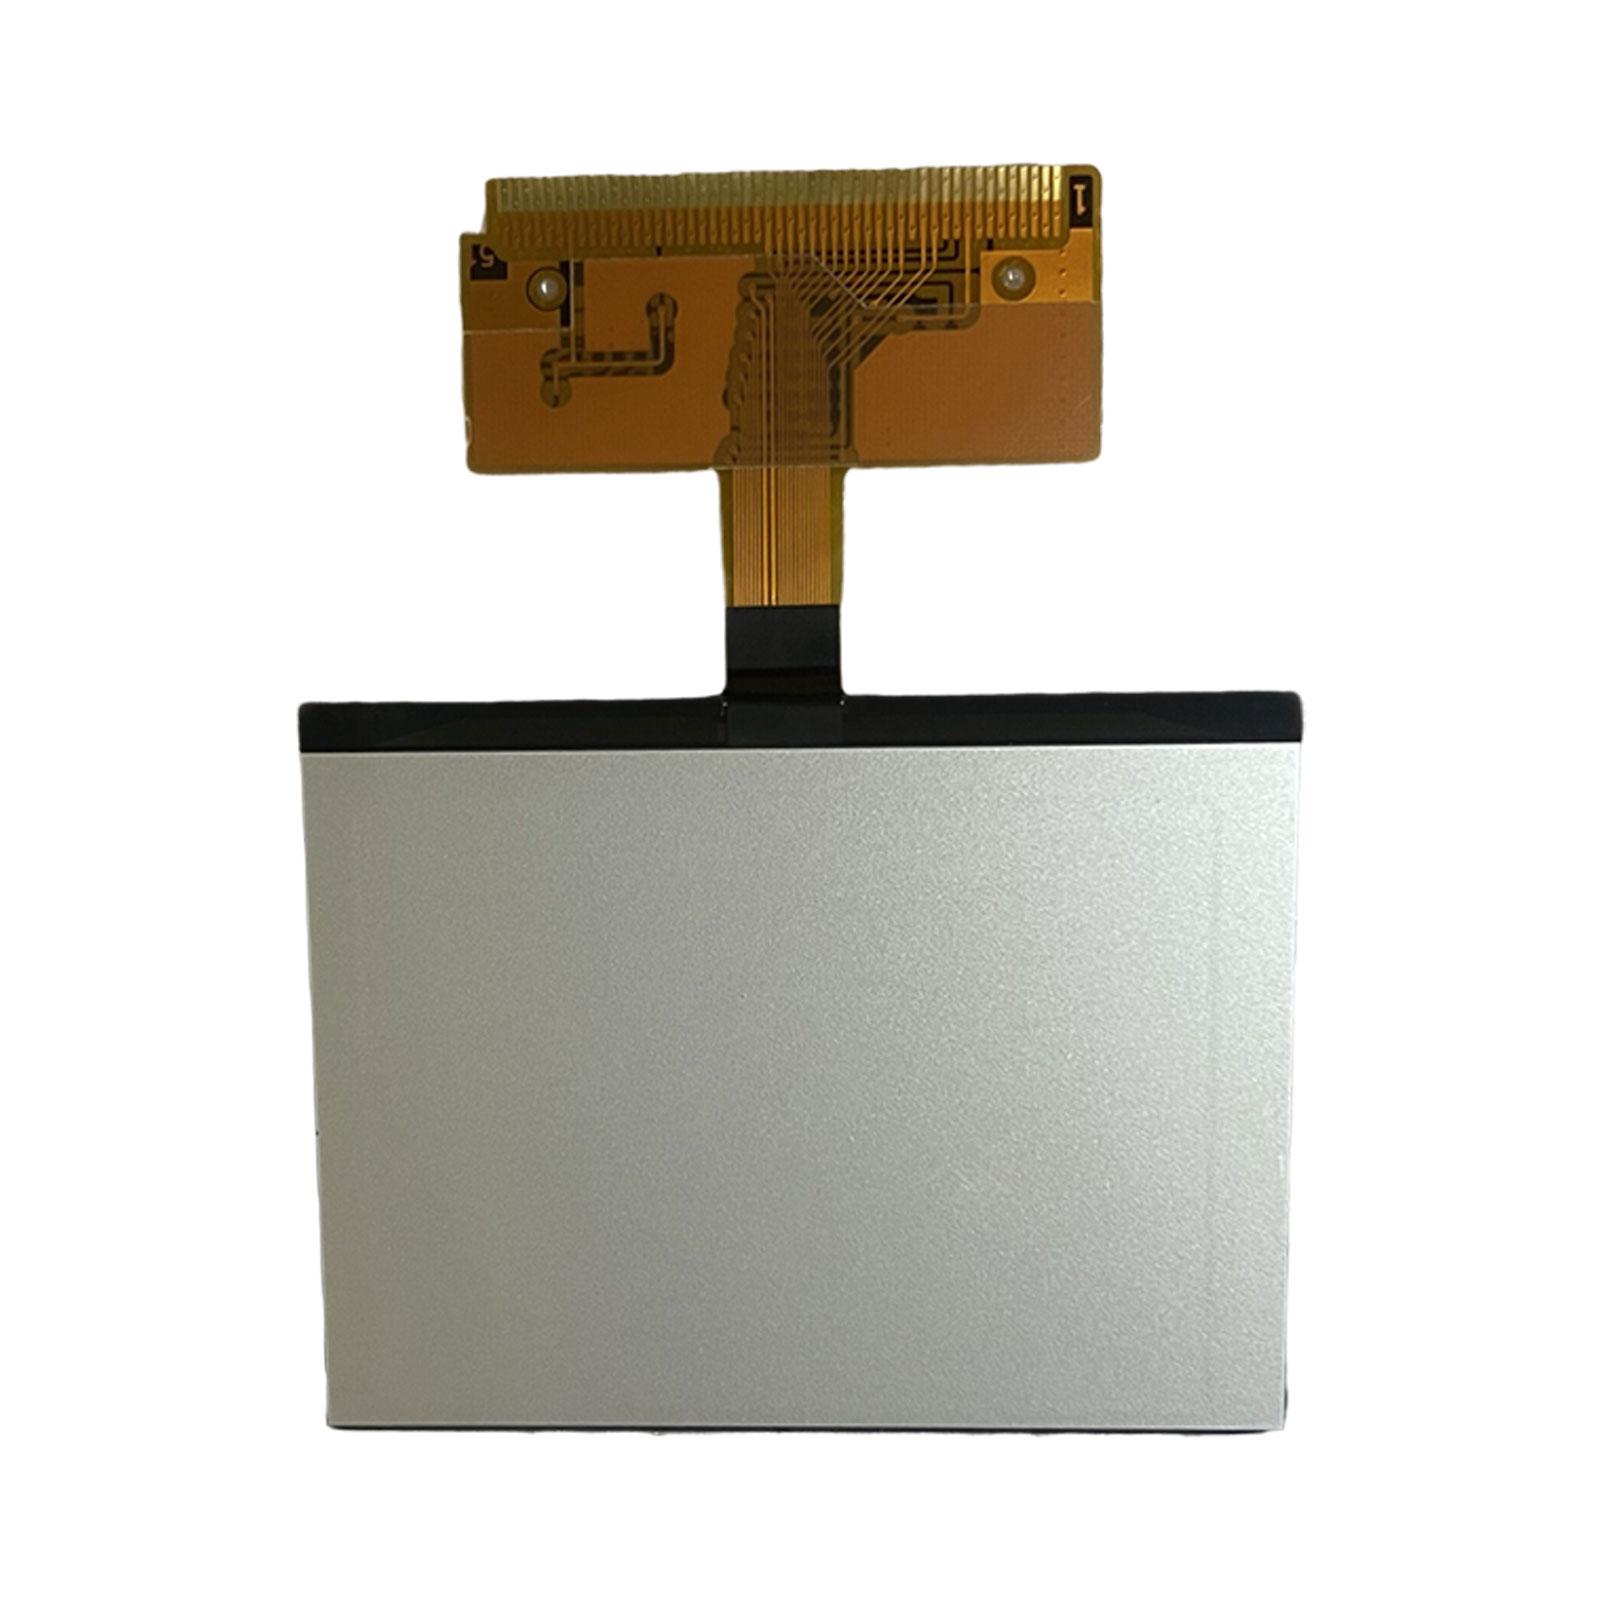 LCD Display Replacement Vehicle Spare Parts for Audi A3 A4 A6 S4 B5 Vdo